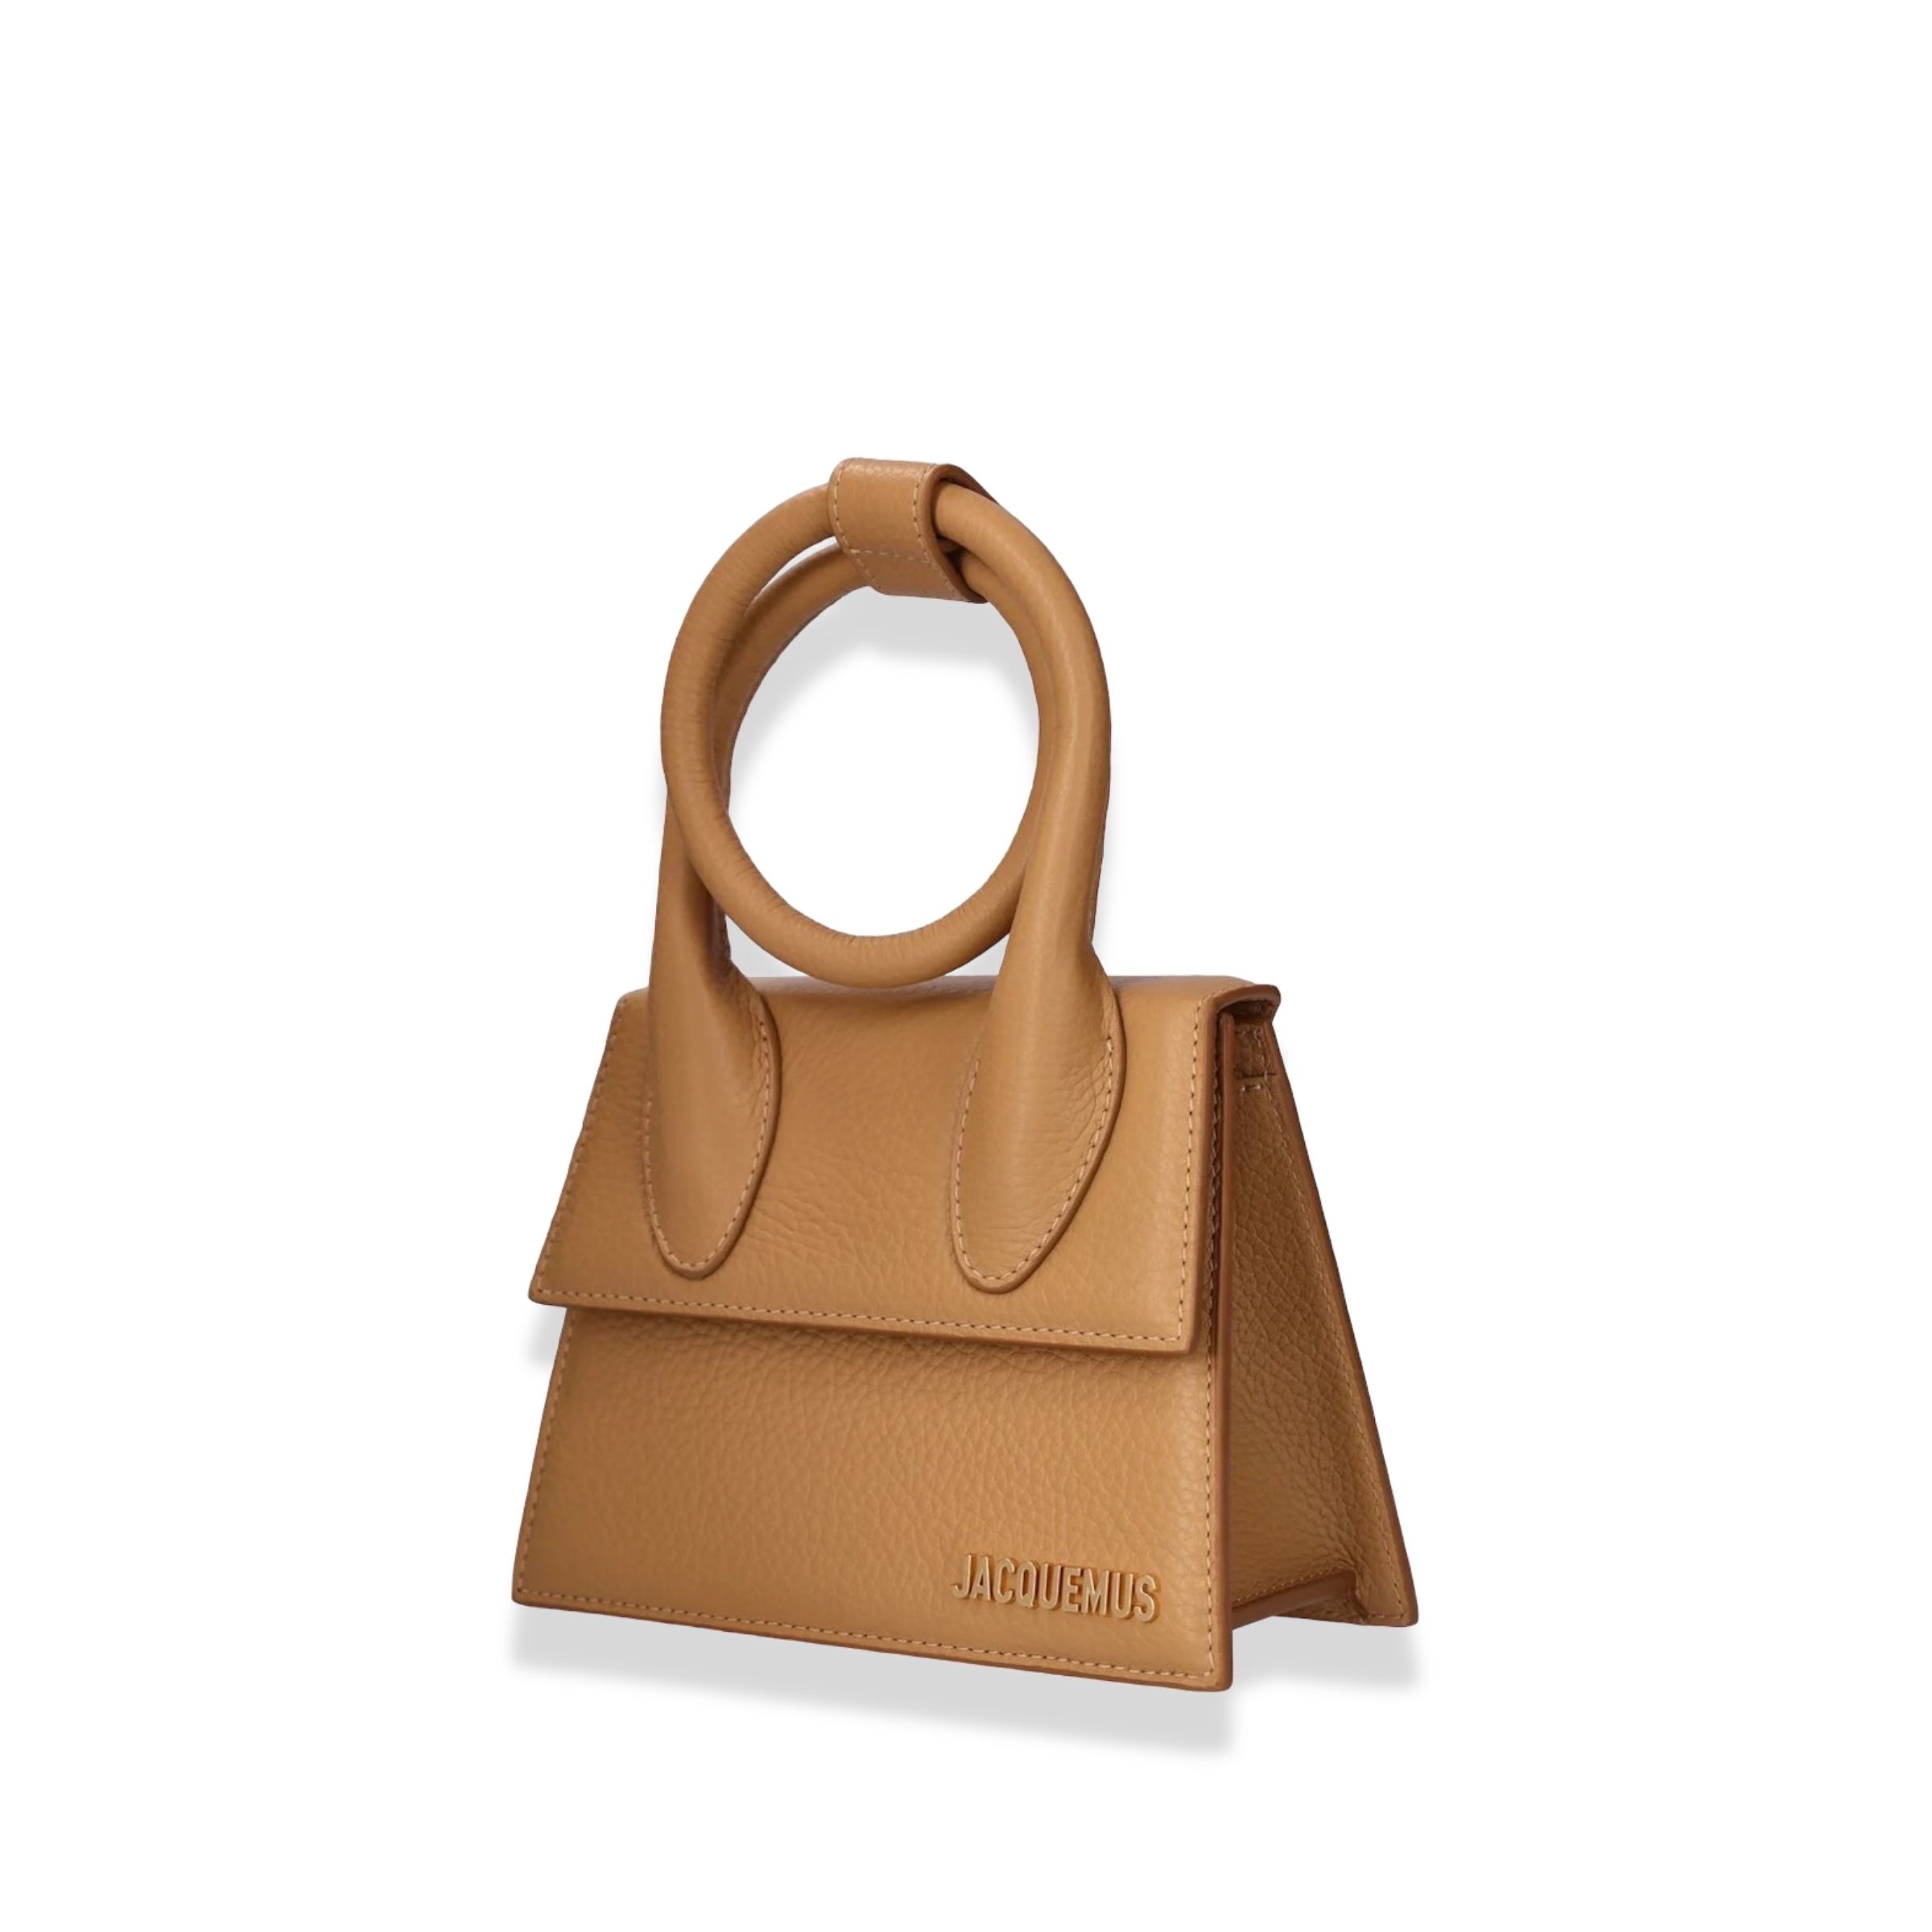 Jacquemus - Le Chiquito Noeud Bag Camel Brown